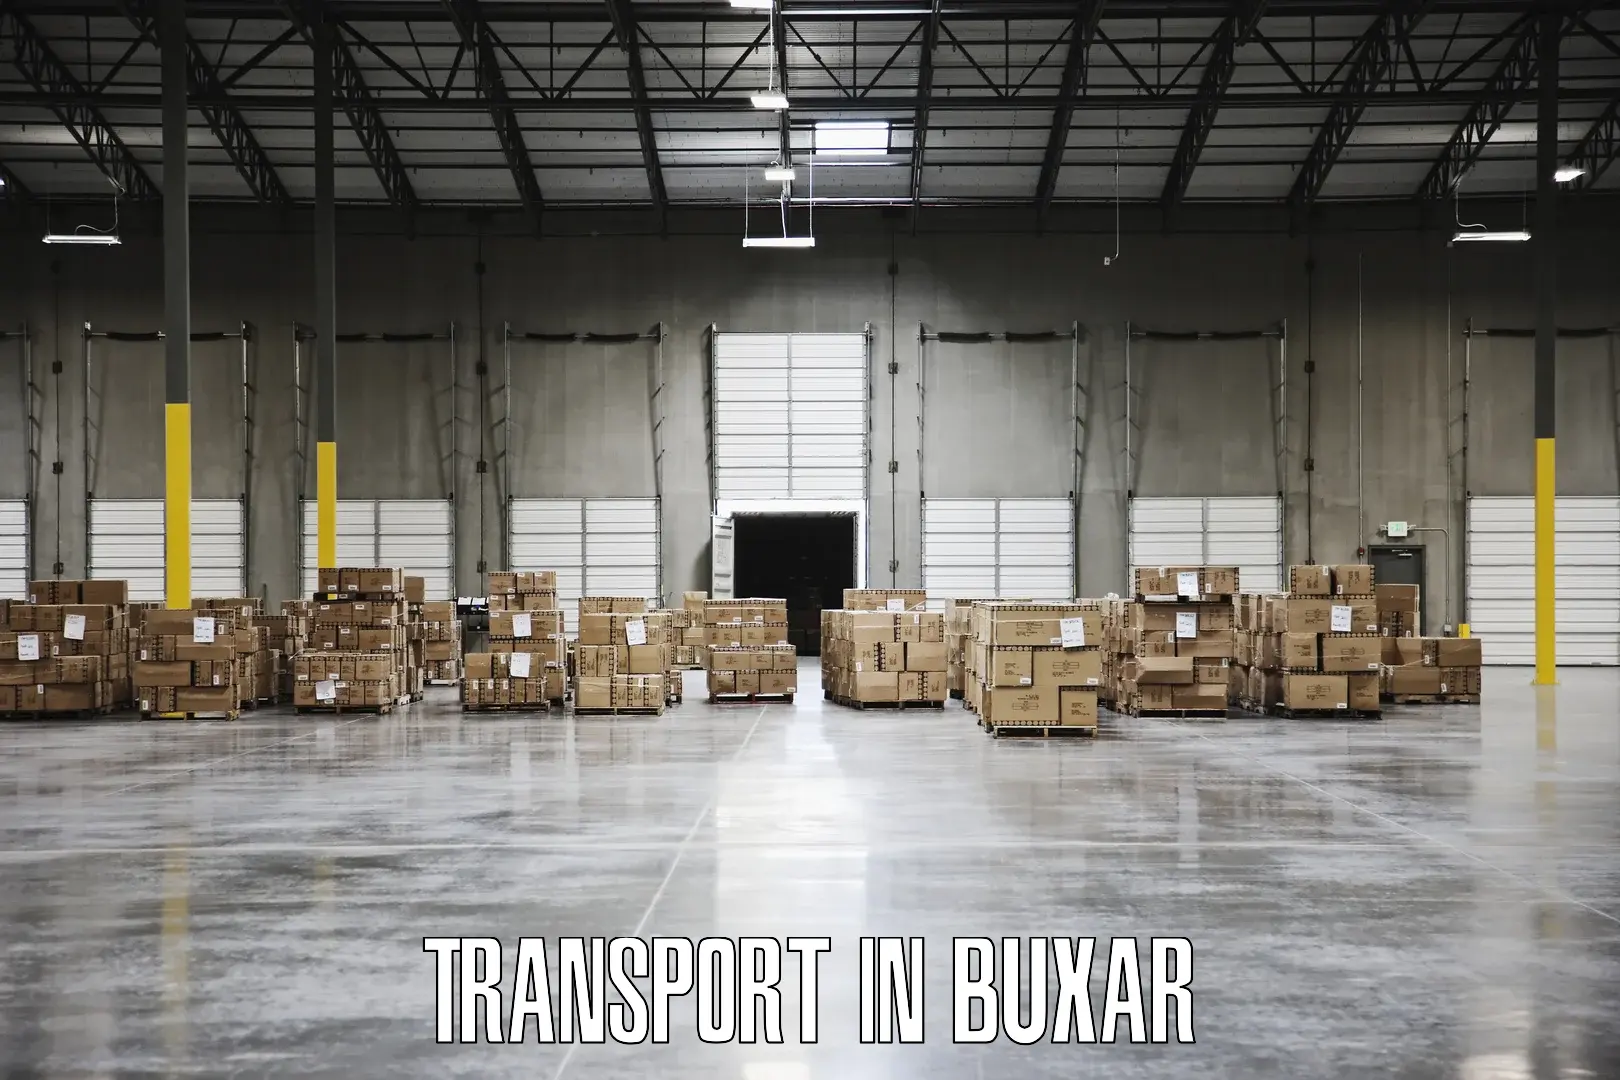 Daily parcel service transport in Buxar